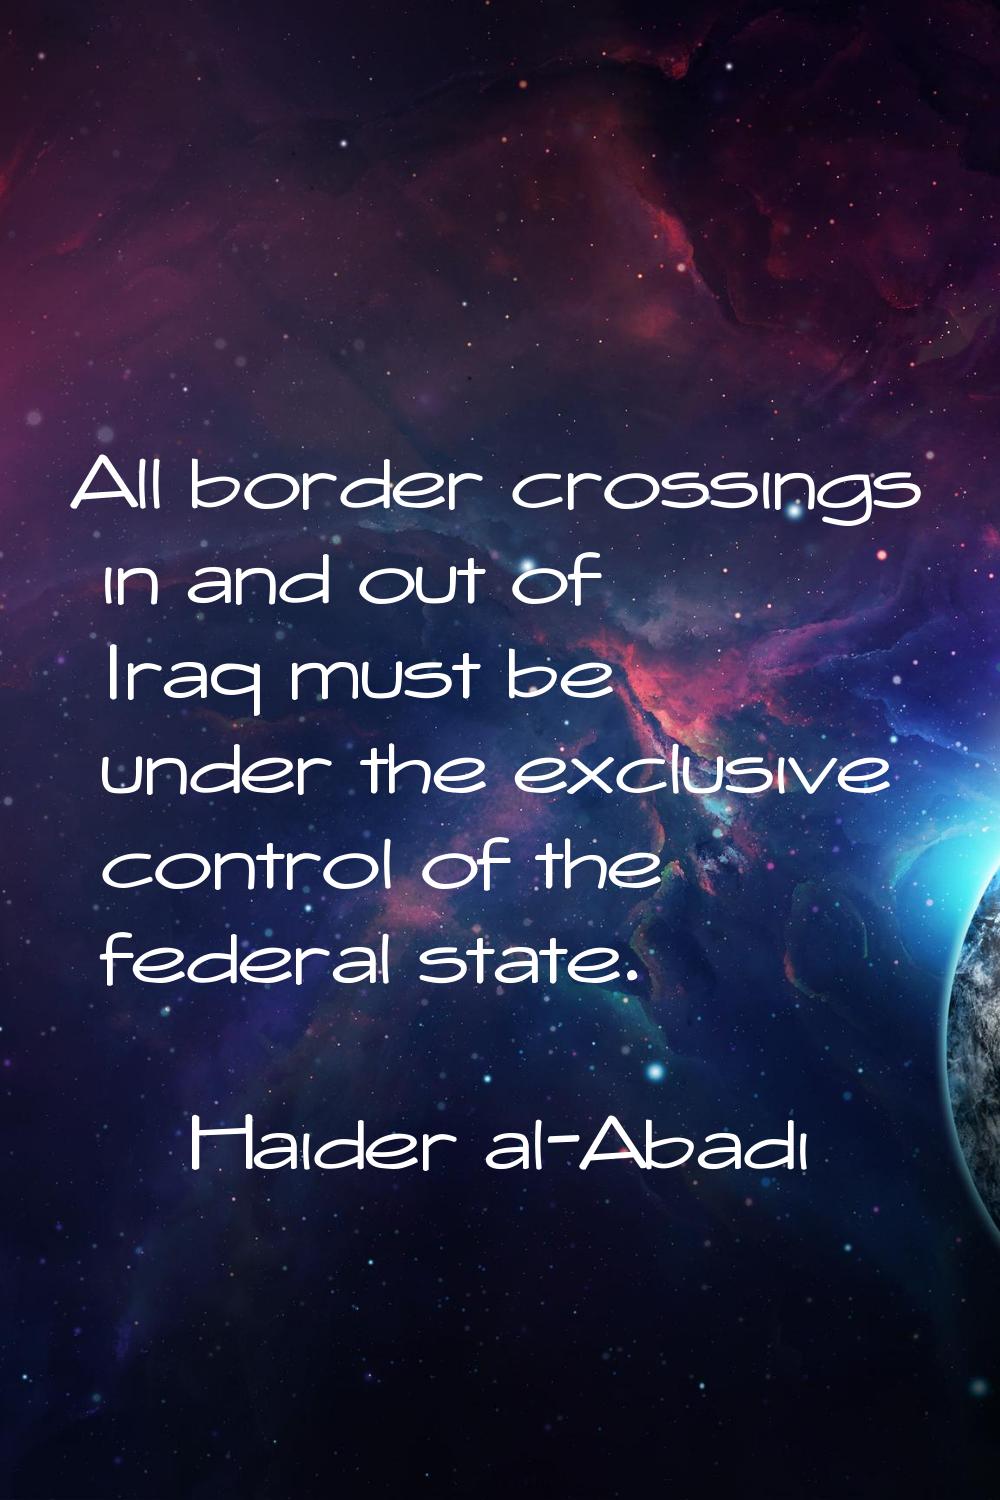 All border crossings in and out of Iraq must be under the exclusive control of the federal state.